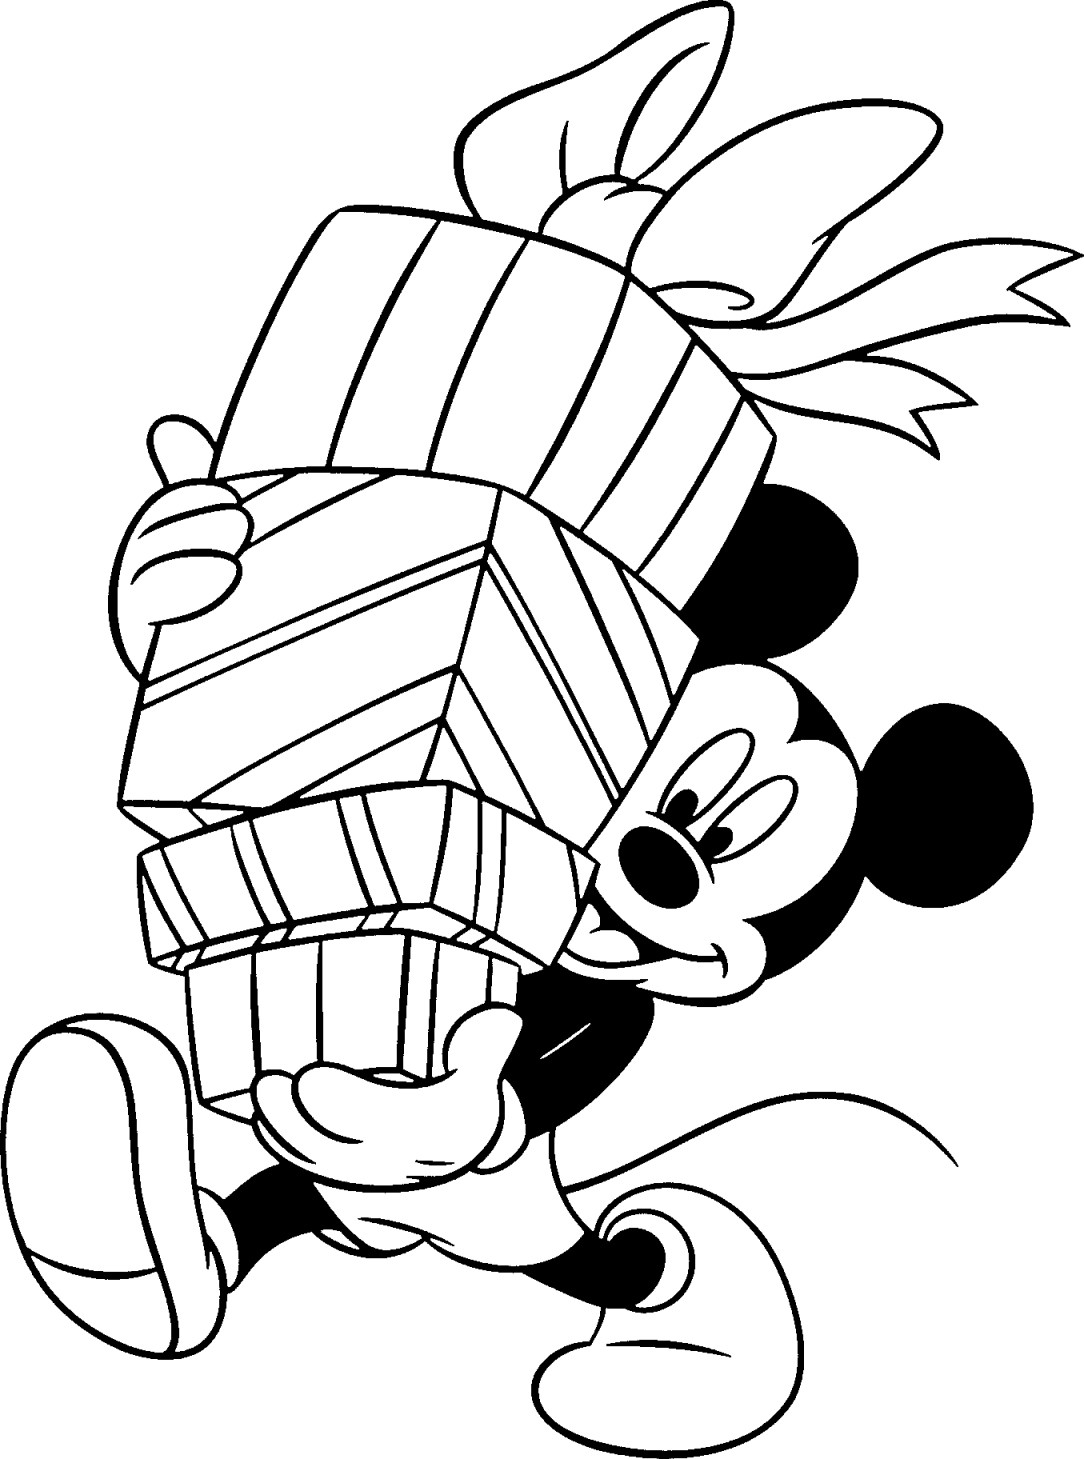 Printable Coloring Pages Disney
 Coloring Pages Christmas Disney Disney Coloring Pages